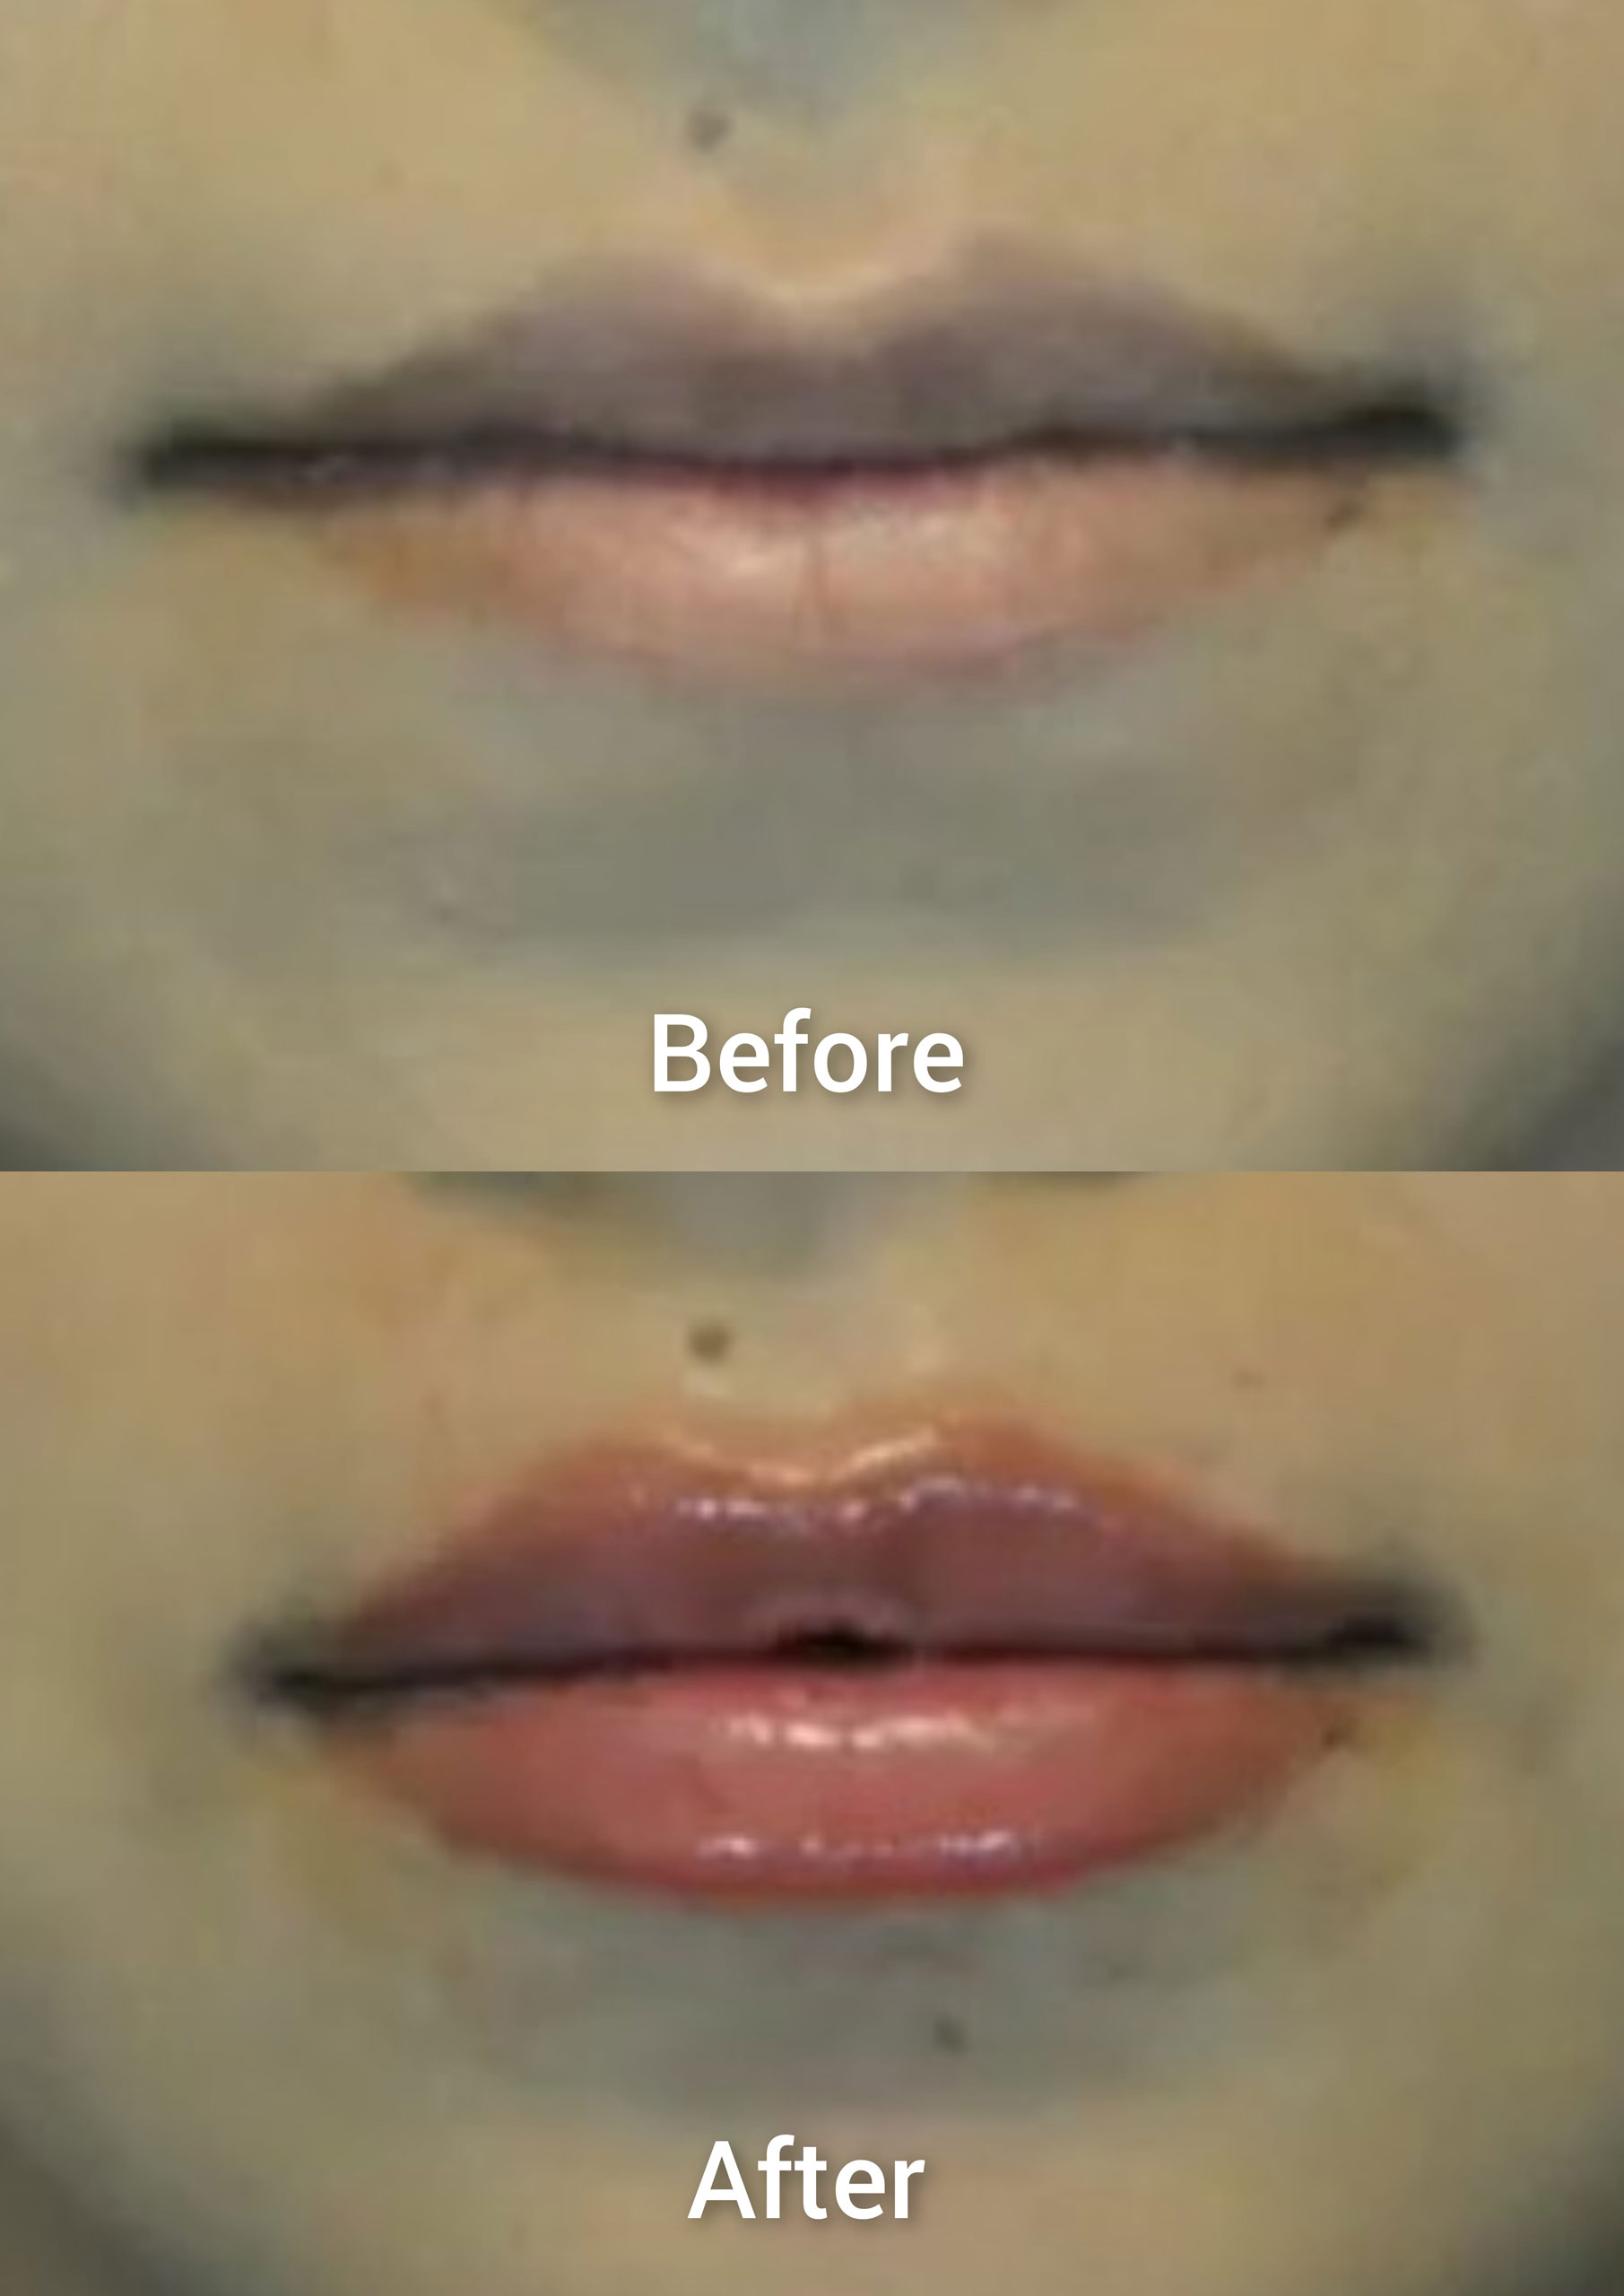 The before top image shows a young female lips in her 20’s. Her top lip is slightly M shaped. The middle portion is touching the bottom lip but the sides has some space. She thought her lips are slightly wider and she wants it to be a little rounder. She also wants to have a key hole. The after bottom image shows naturally plumped-up lips after injection of hyaluronic acid filler. Her lips now looks more rounded, her cupid’s bow more defined and perky with a natural- looking pout.